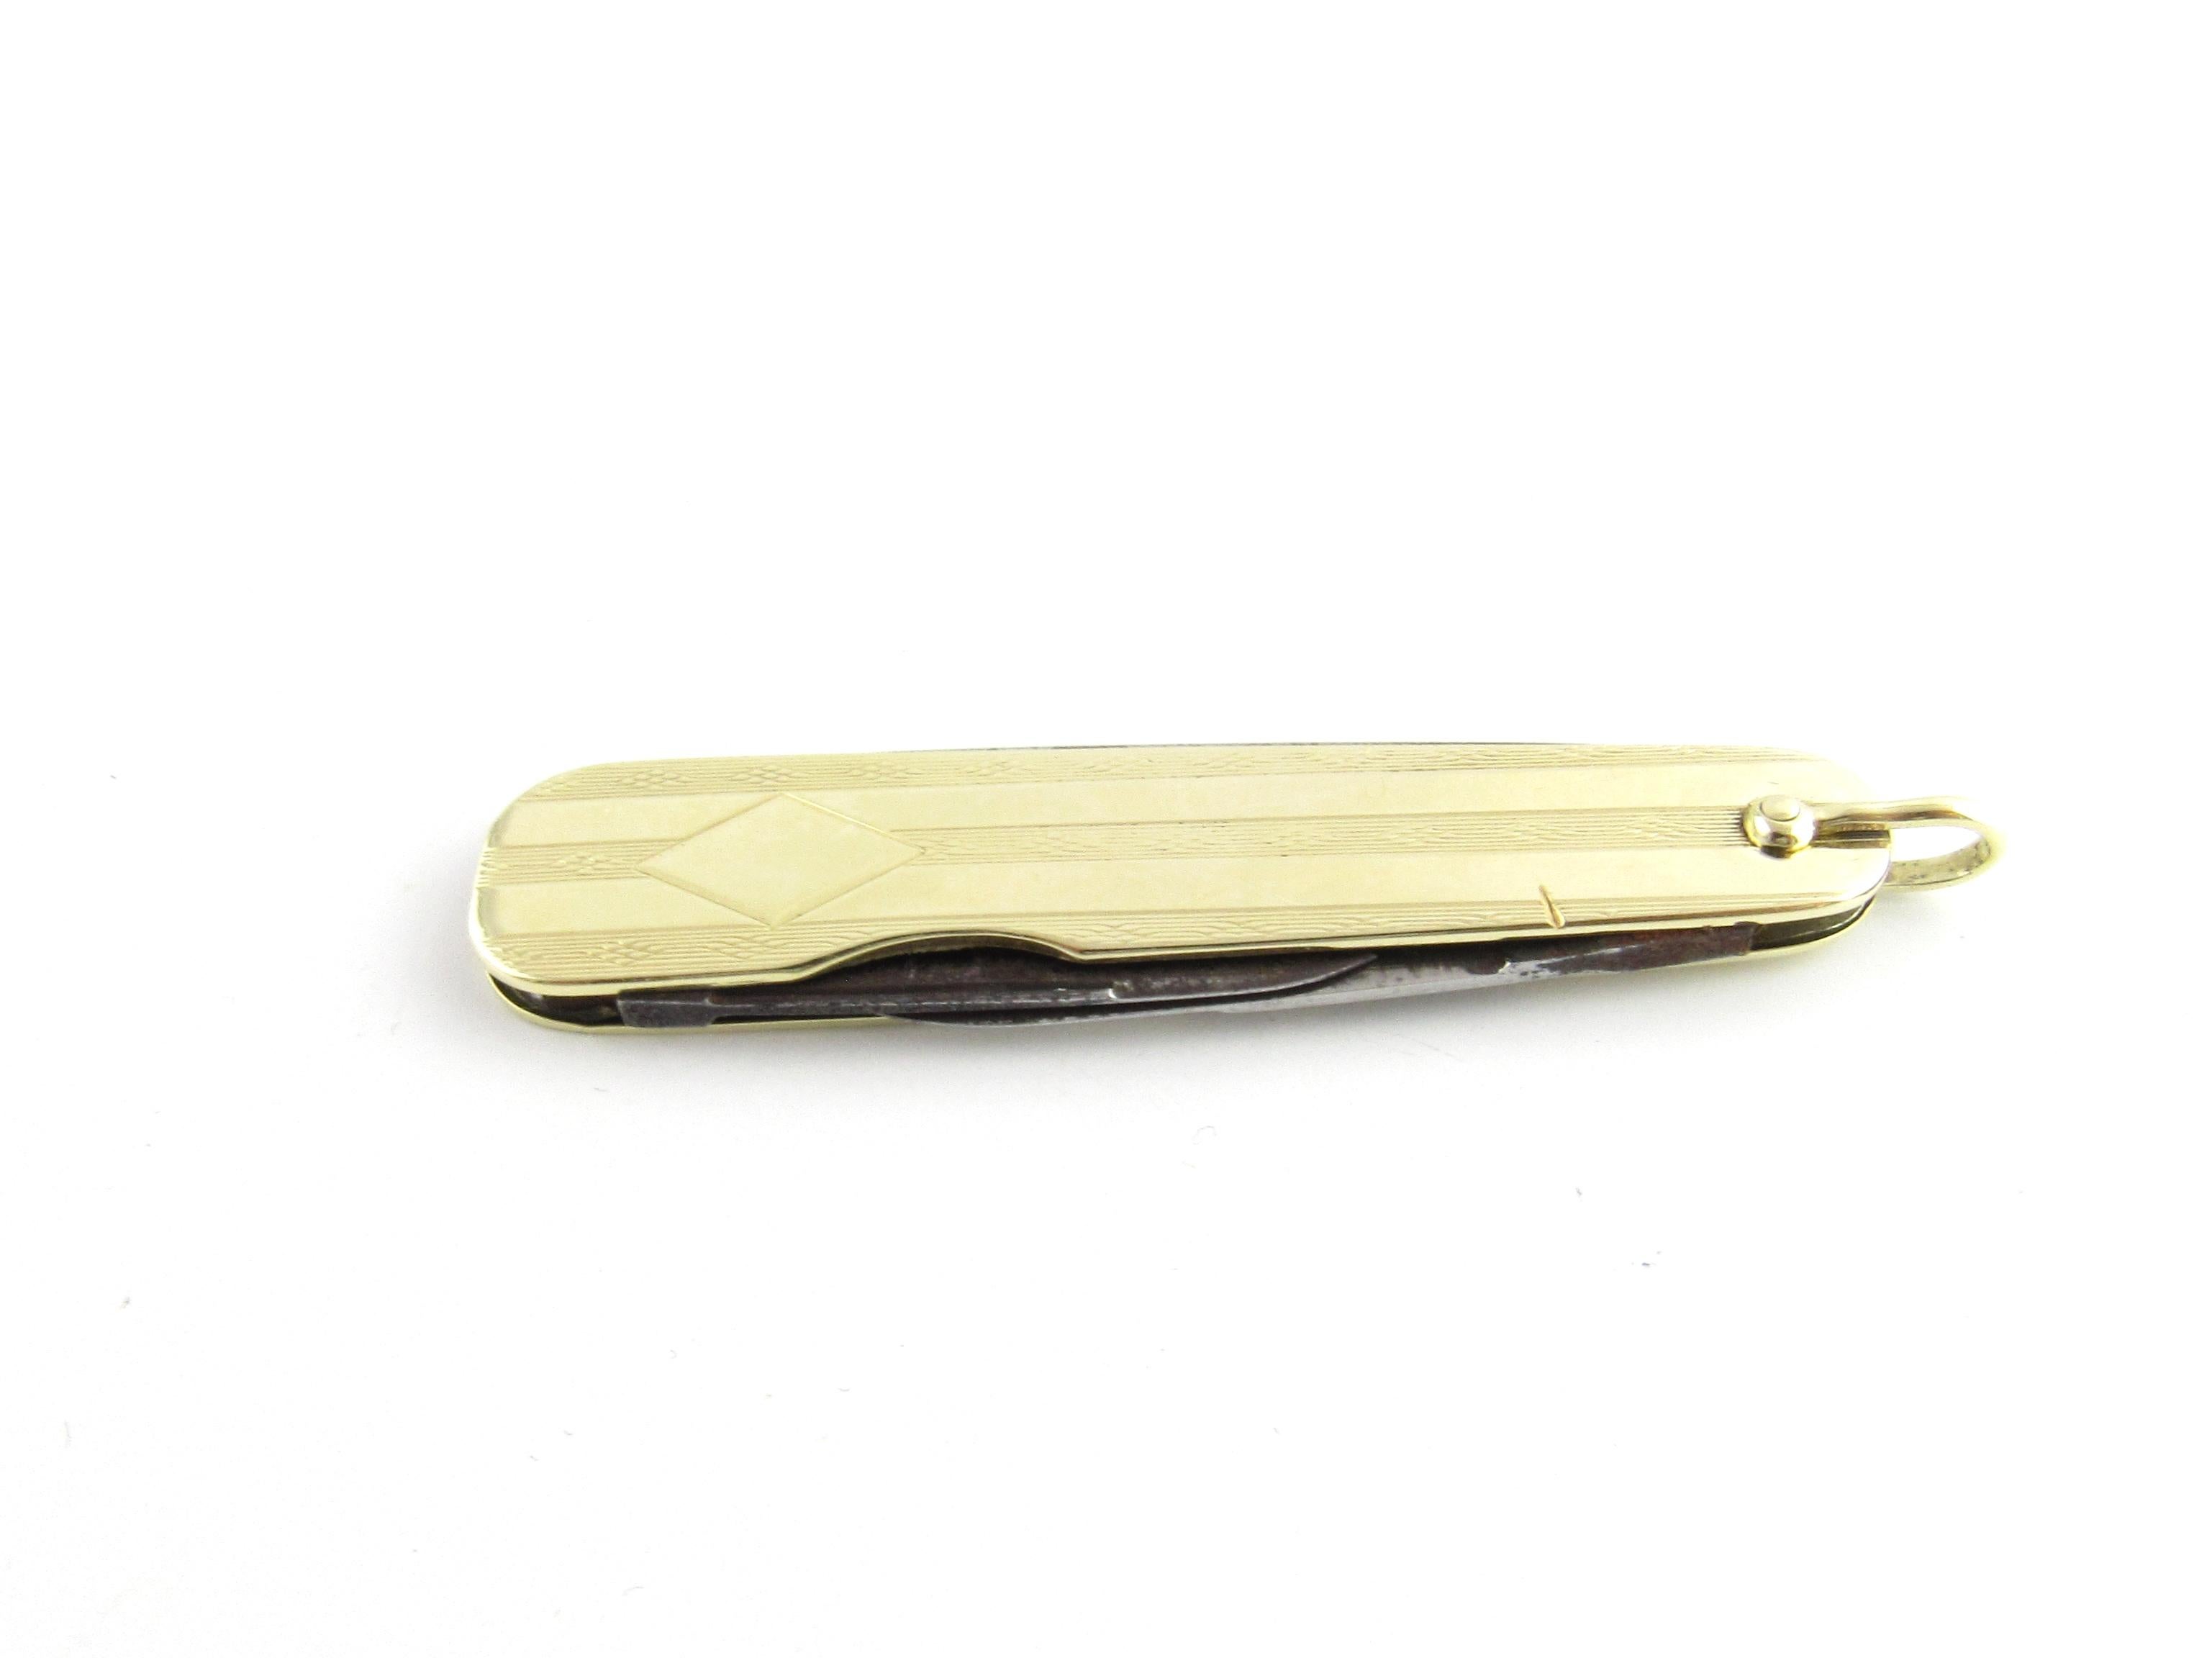 Vintage 14 Karat Yellow Gold Pocket Knife

This elegant pocket knife features a stainless steel blade housed in a beautifully detailed 14K yellow gold case. There is an area on the knife that you can have monogrammed.

Size: 57 mm x 14 mm

Weight: